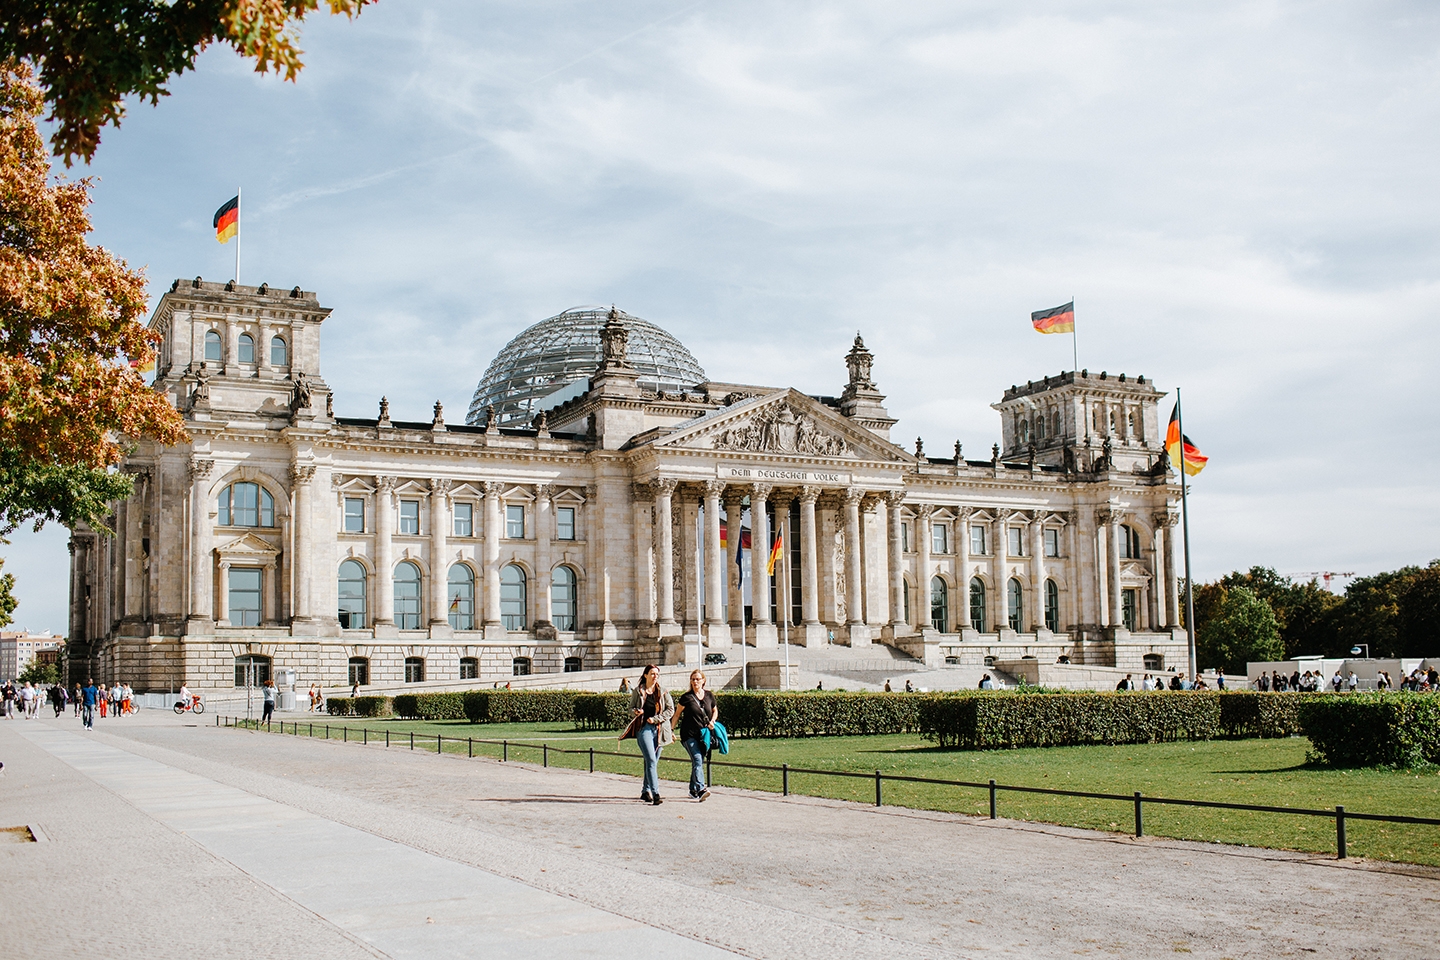 Tour the Reichstag